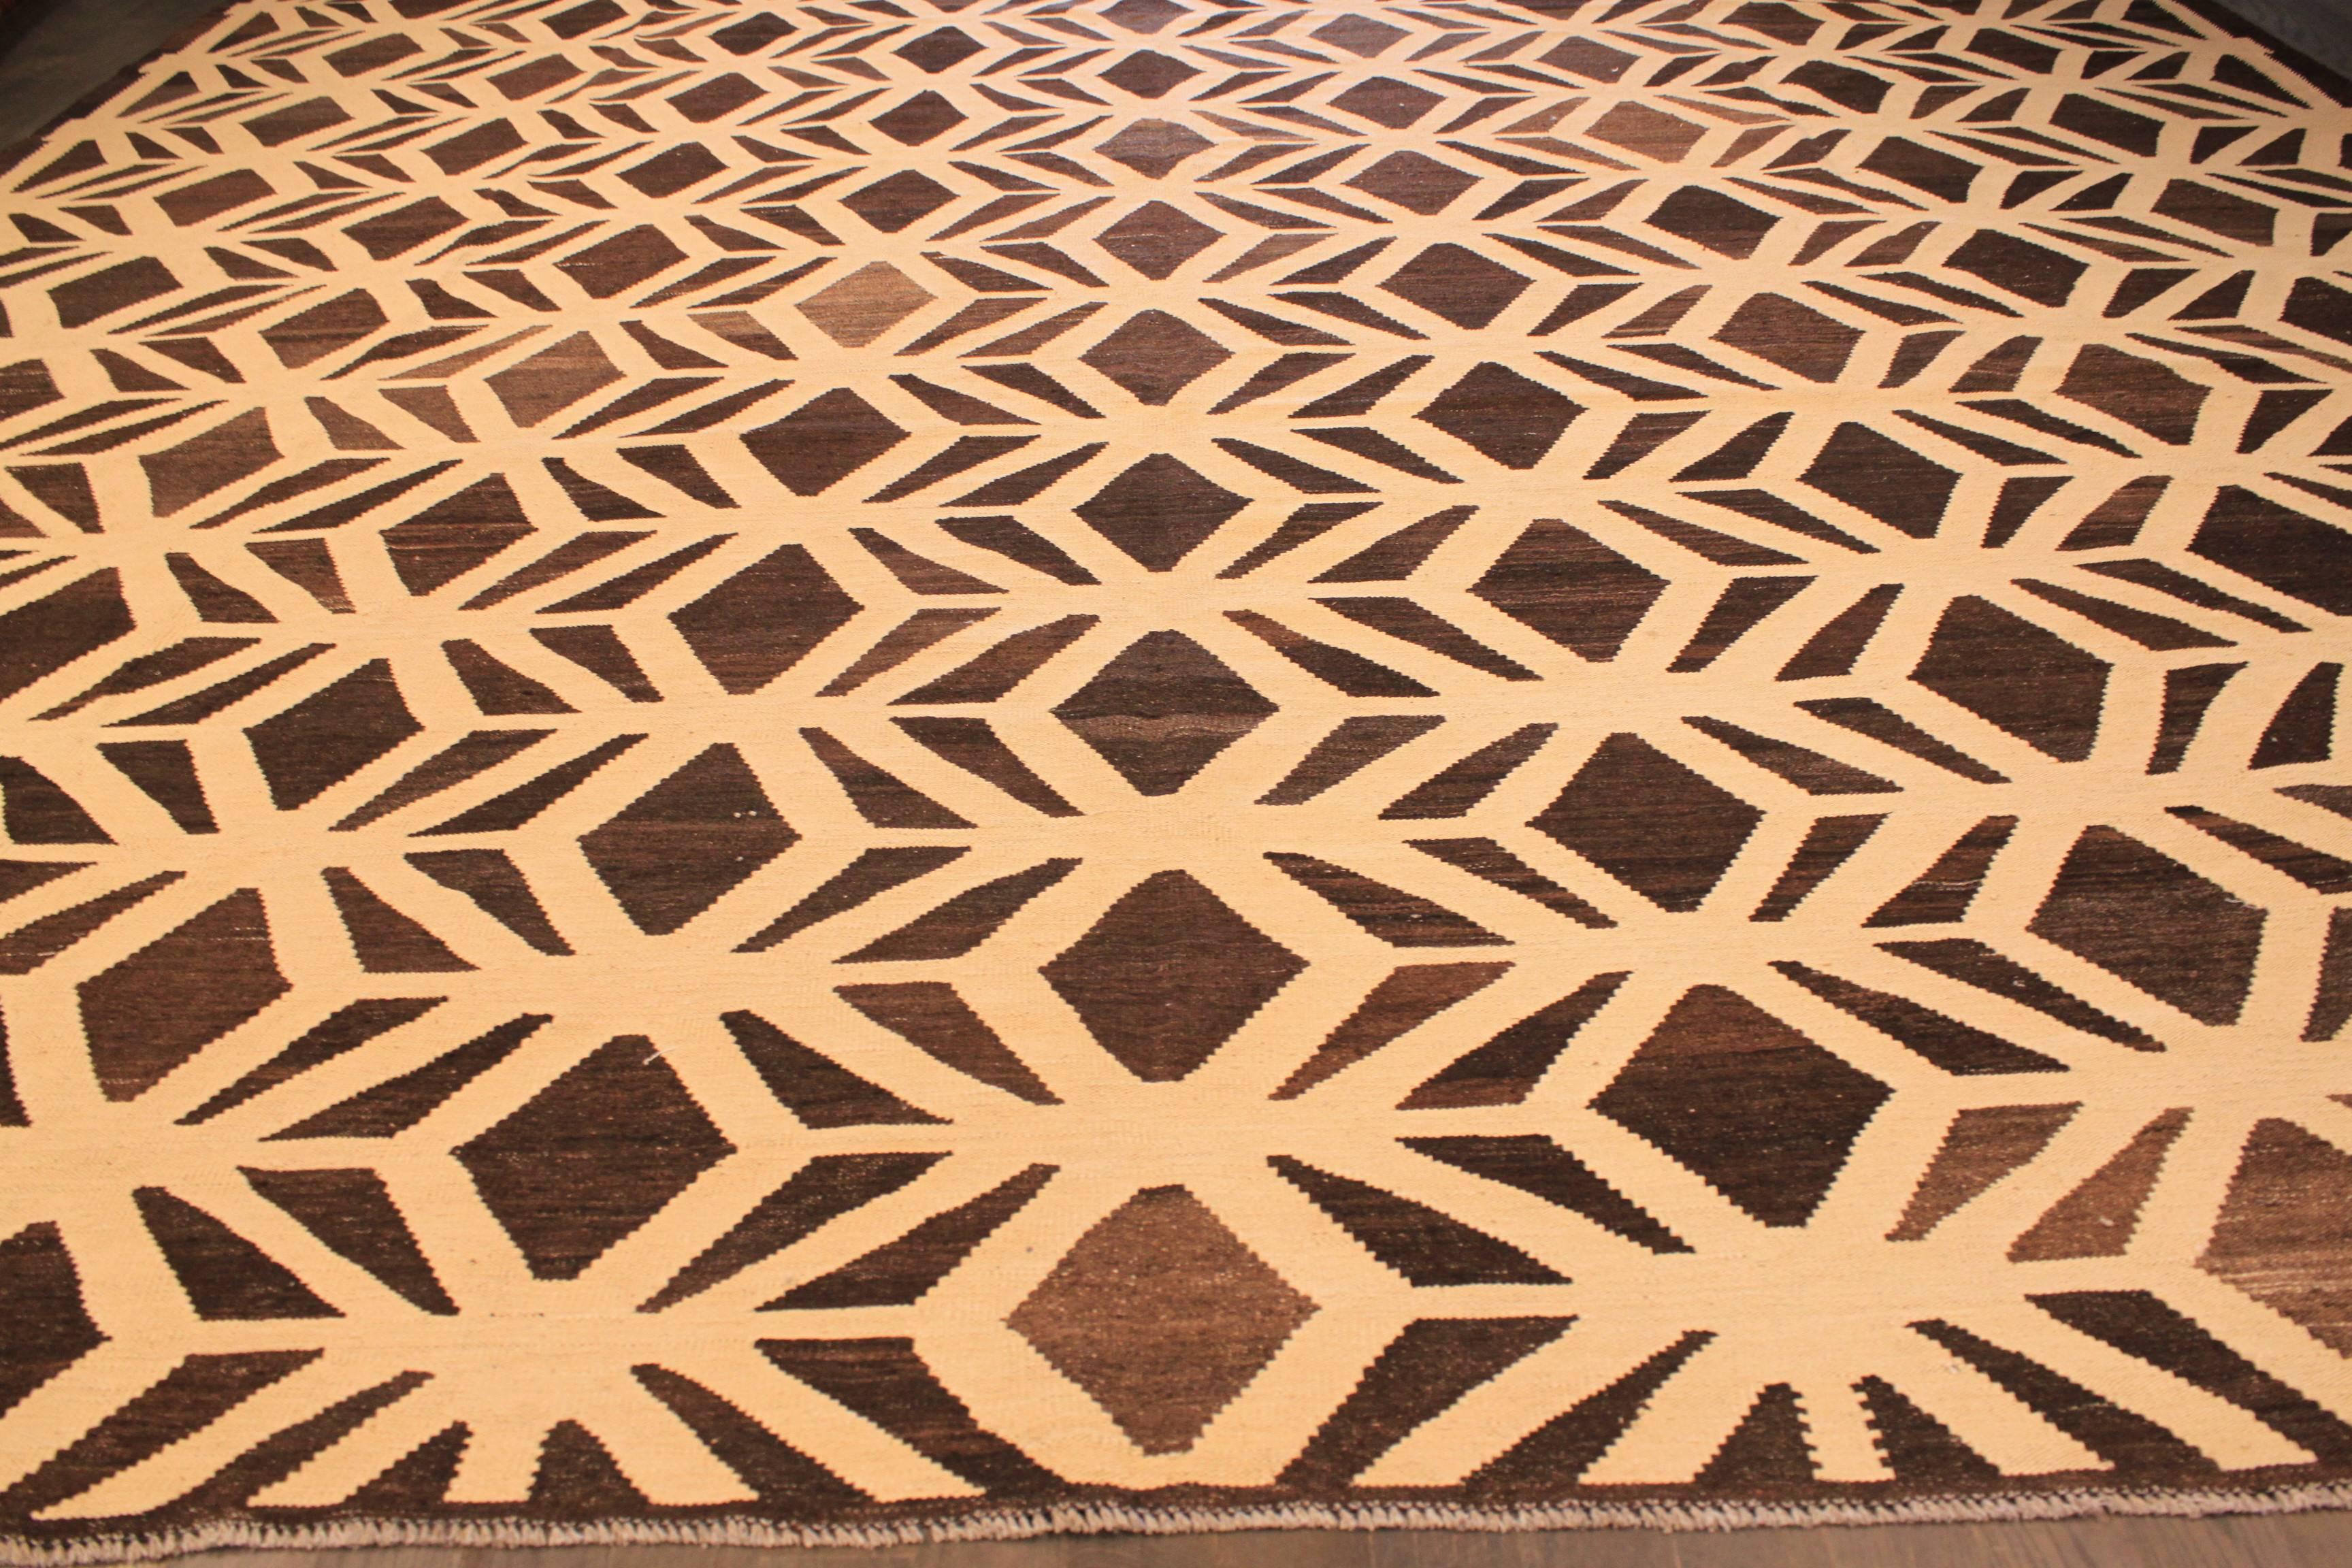 A hand-knotted Kilim rug with a geometric design on a brown field. Accents of beige and brown throughout the piece. This rug measures 12'.3 x 14'.9.